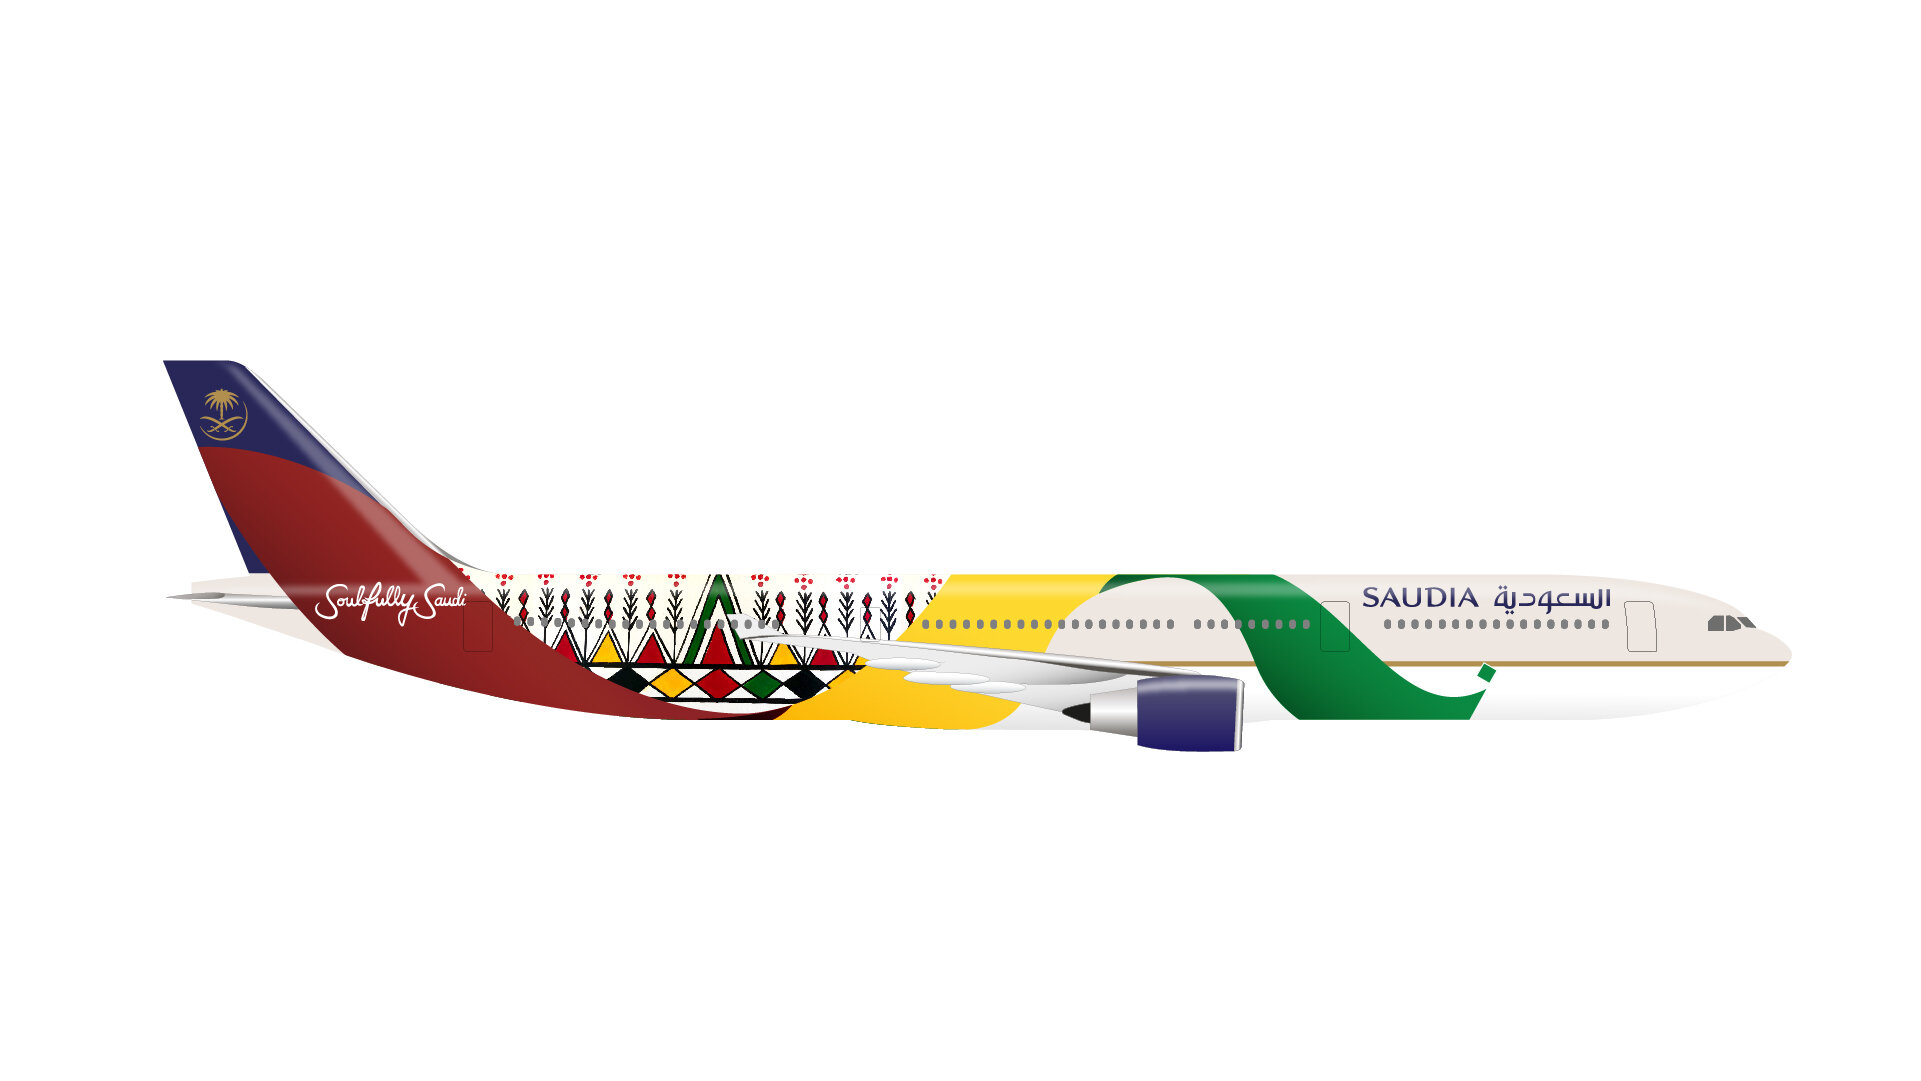 SAUDIA_Route 1_Exploration_Livery - 4_Plane RIGHT SIDE 4.jpg